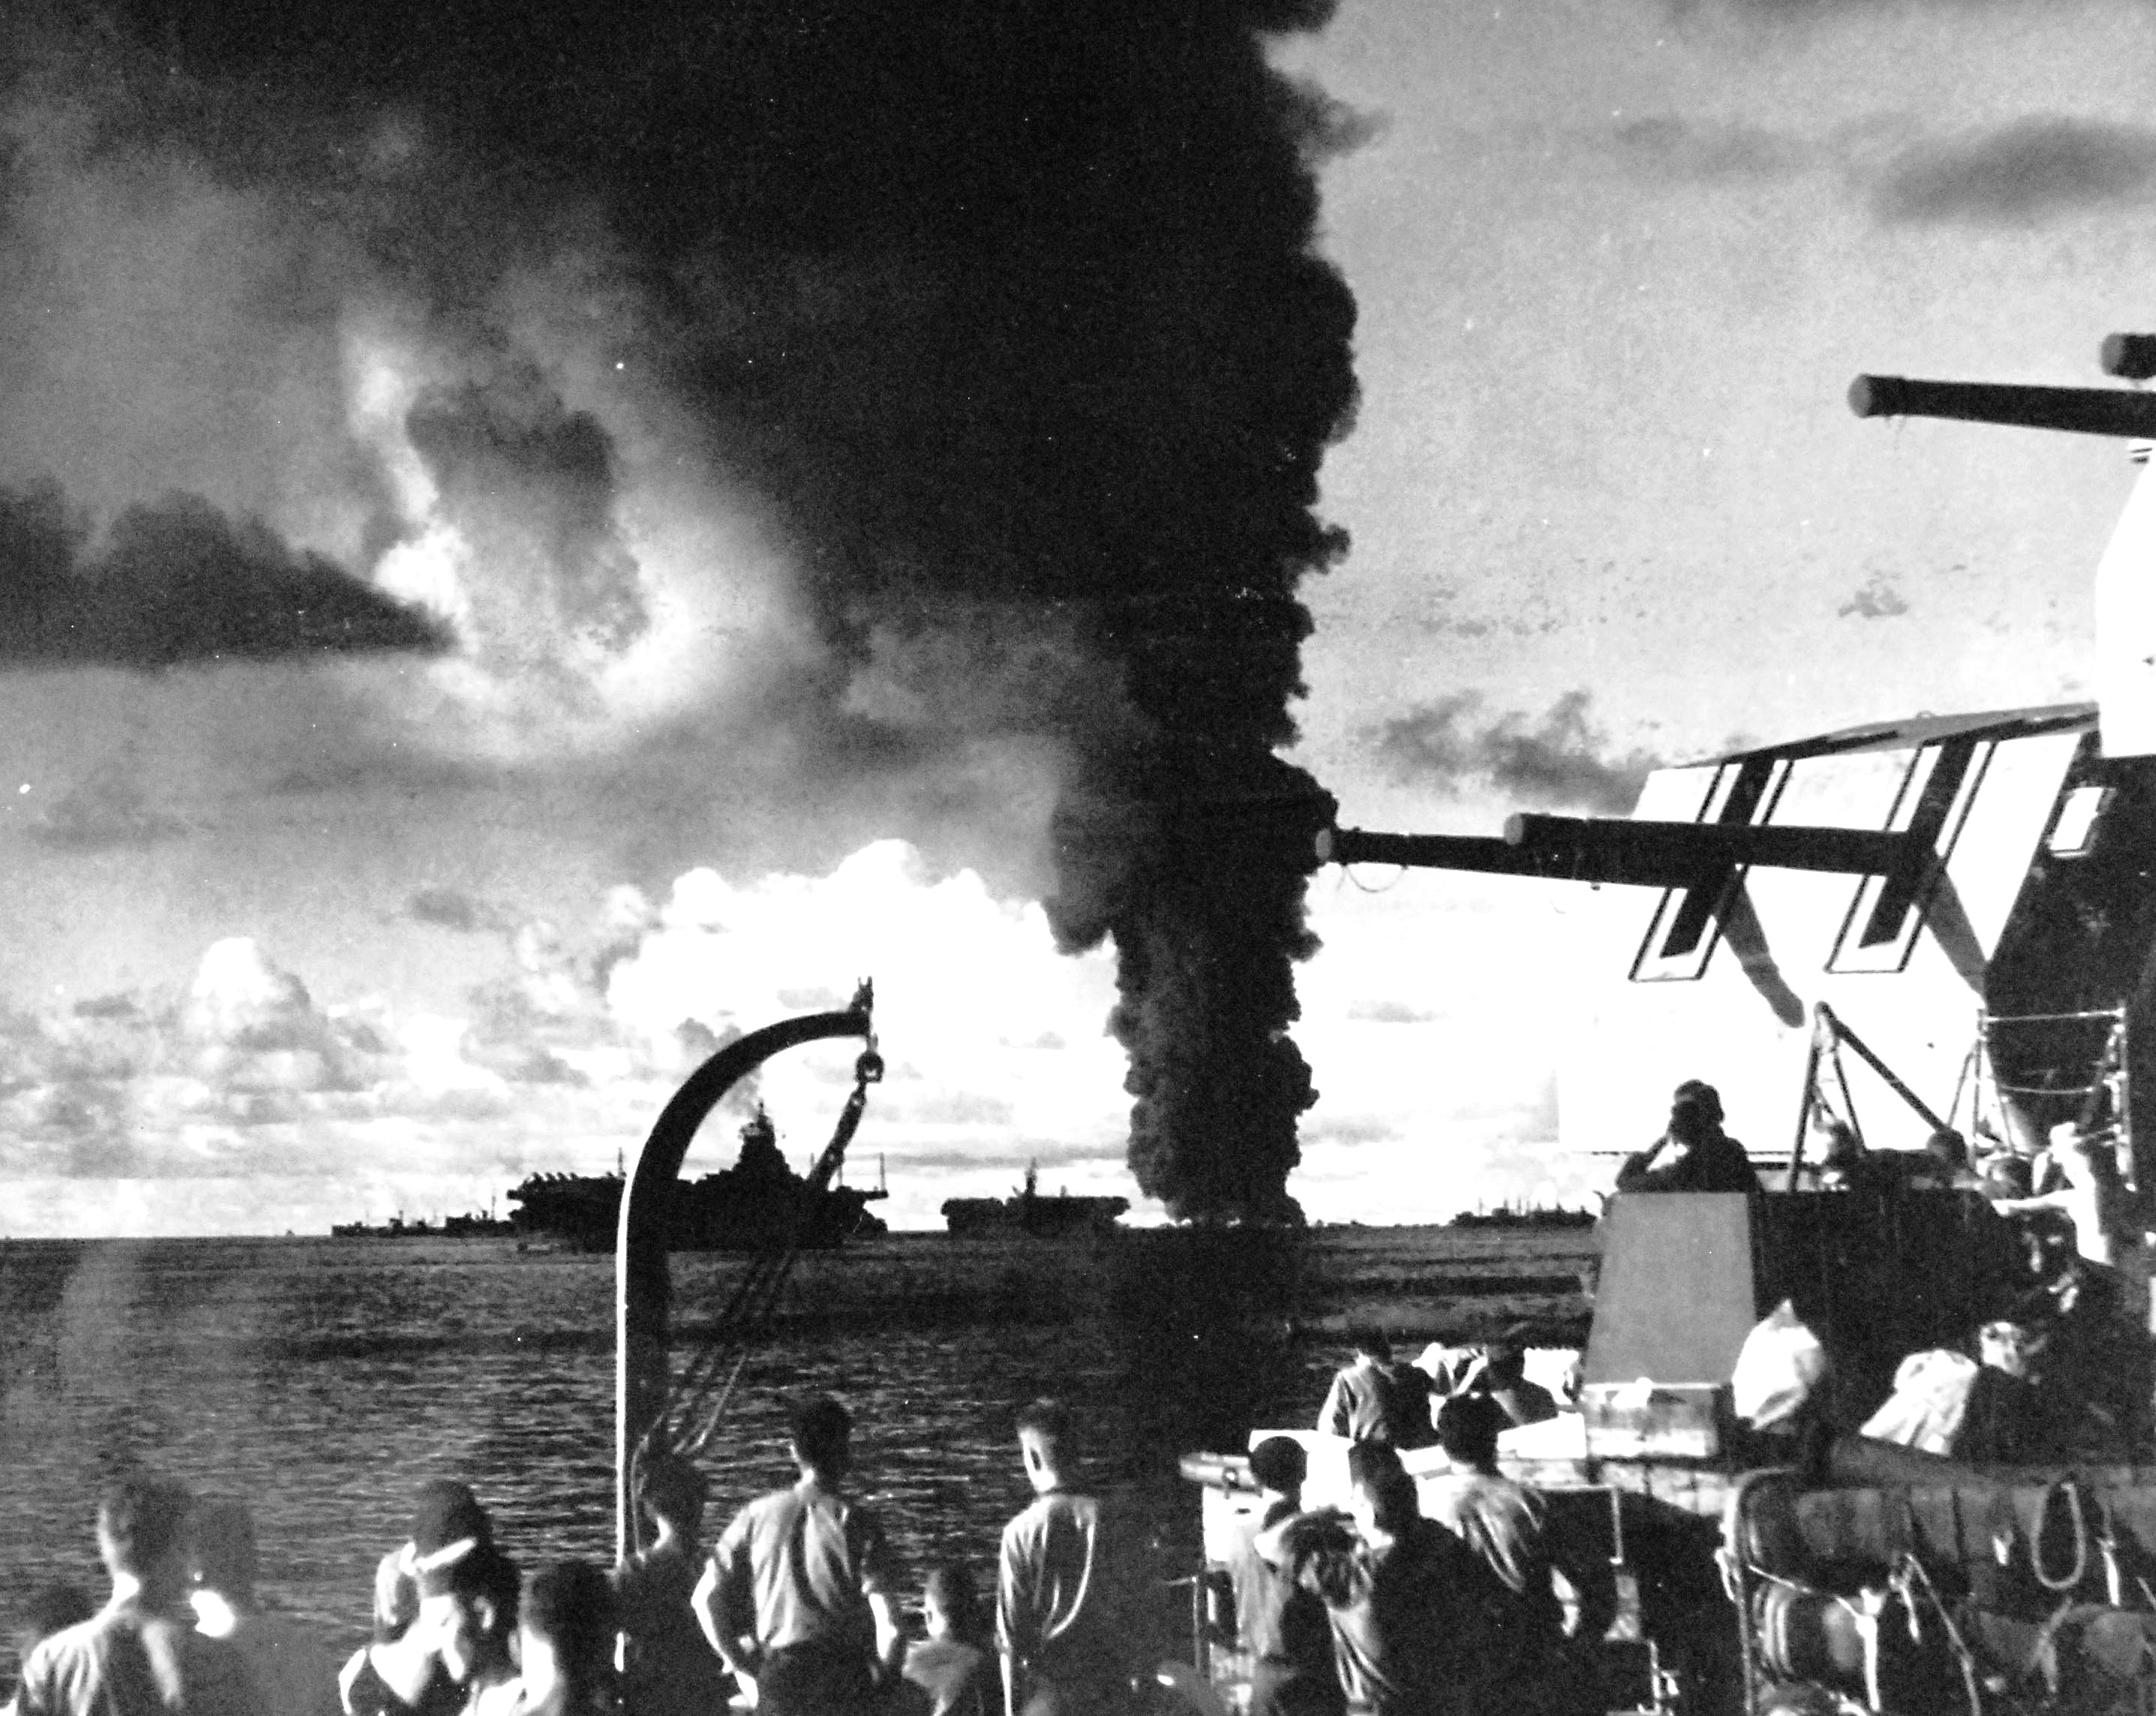 Smoke plume from the burning oiler USS Mississinewa in Ulithi Lagoon as seen from the battleship USS South Dakota, 20 Nov 1944. Carriers in the foreground are Bunker Hill and Langley (Independence-class).